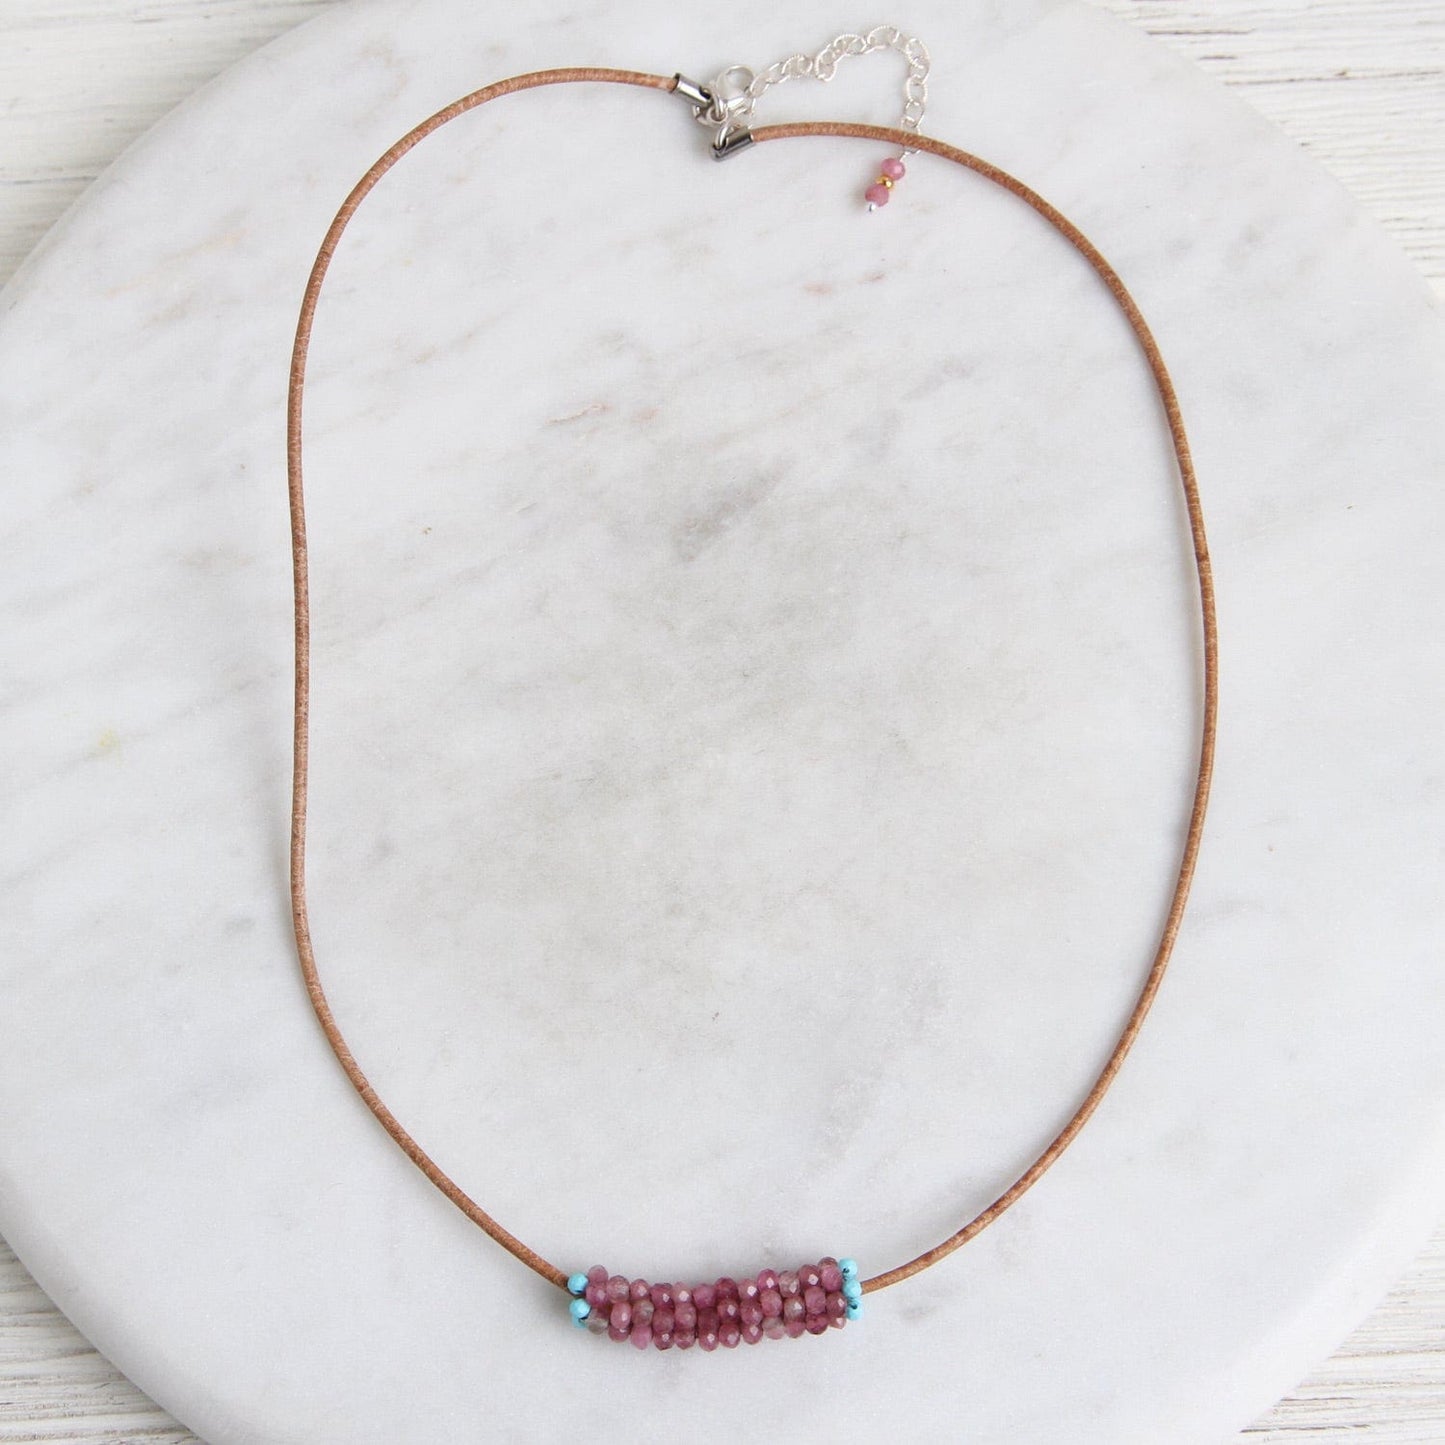 NKL-JM Hand Stitched Pink Tourmaline & Tiny Turquoise Trim Leather Necklace